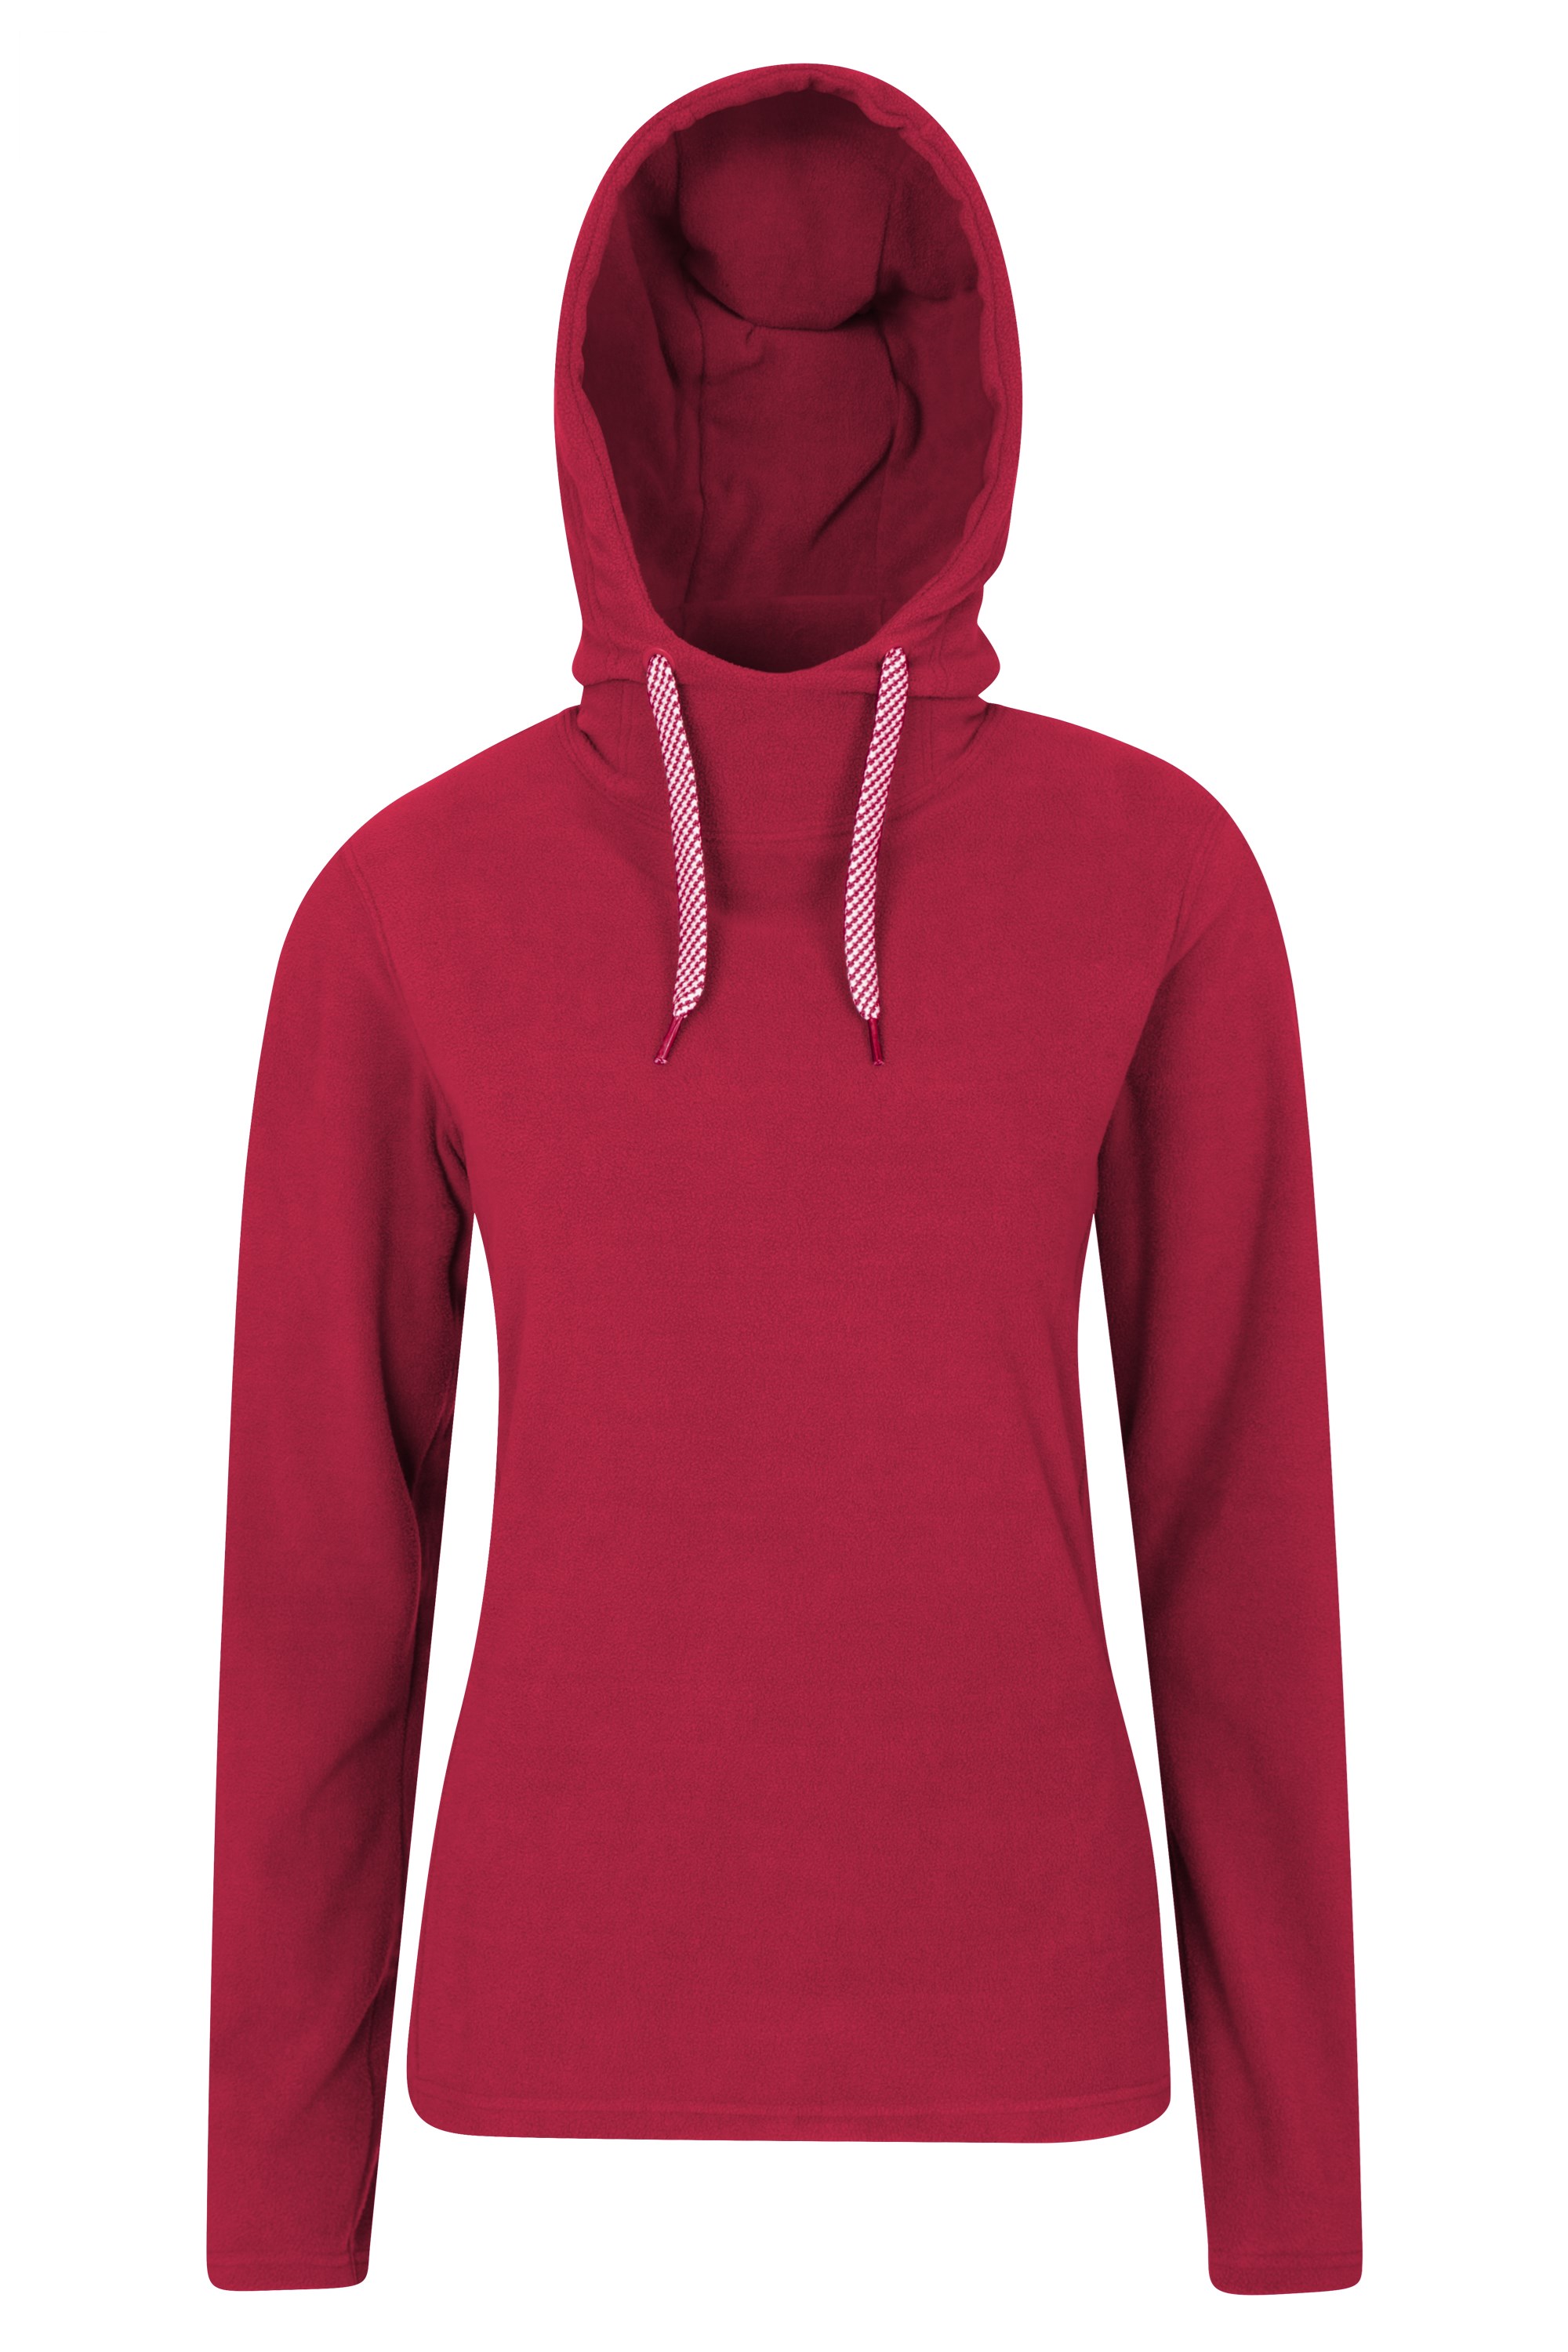 Sycamore Womens Fleece-Hoodie - Red